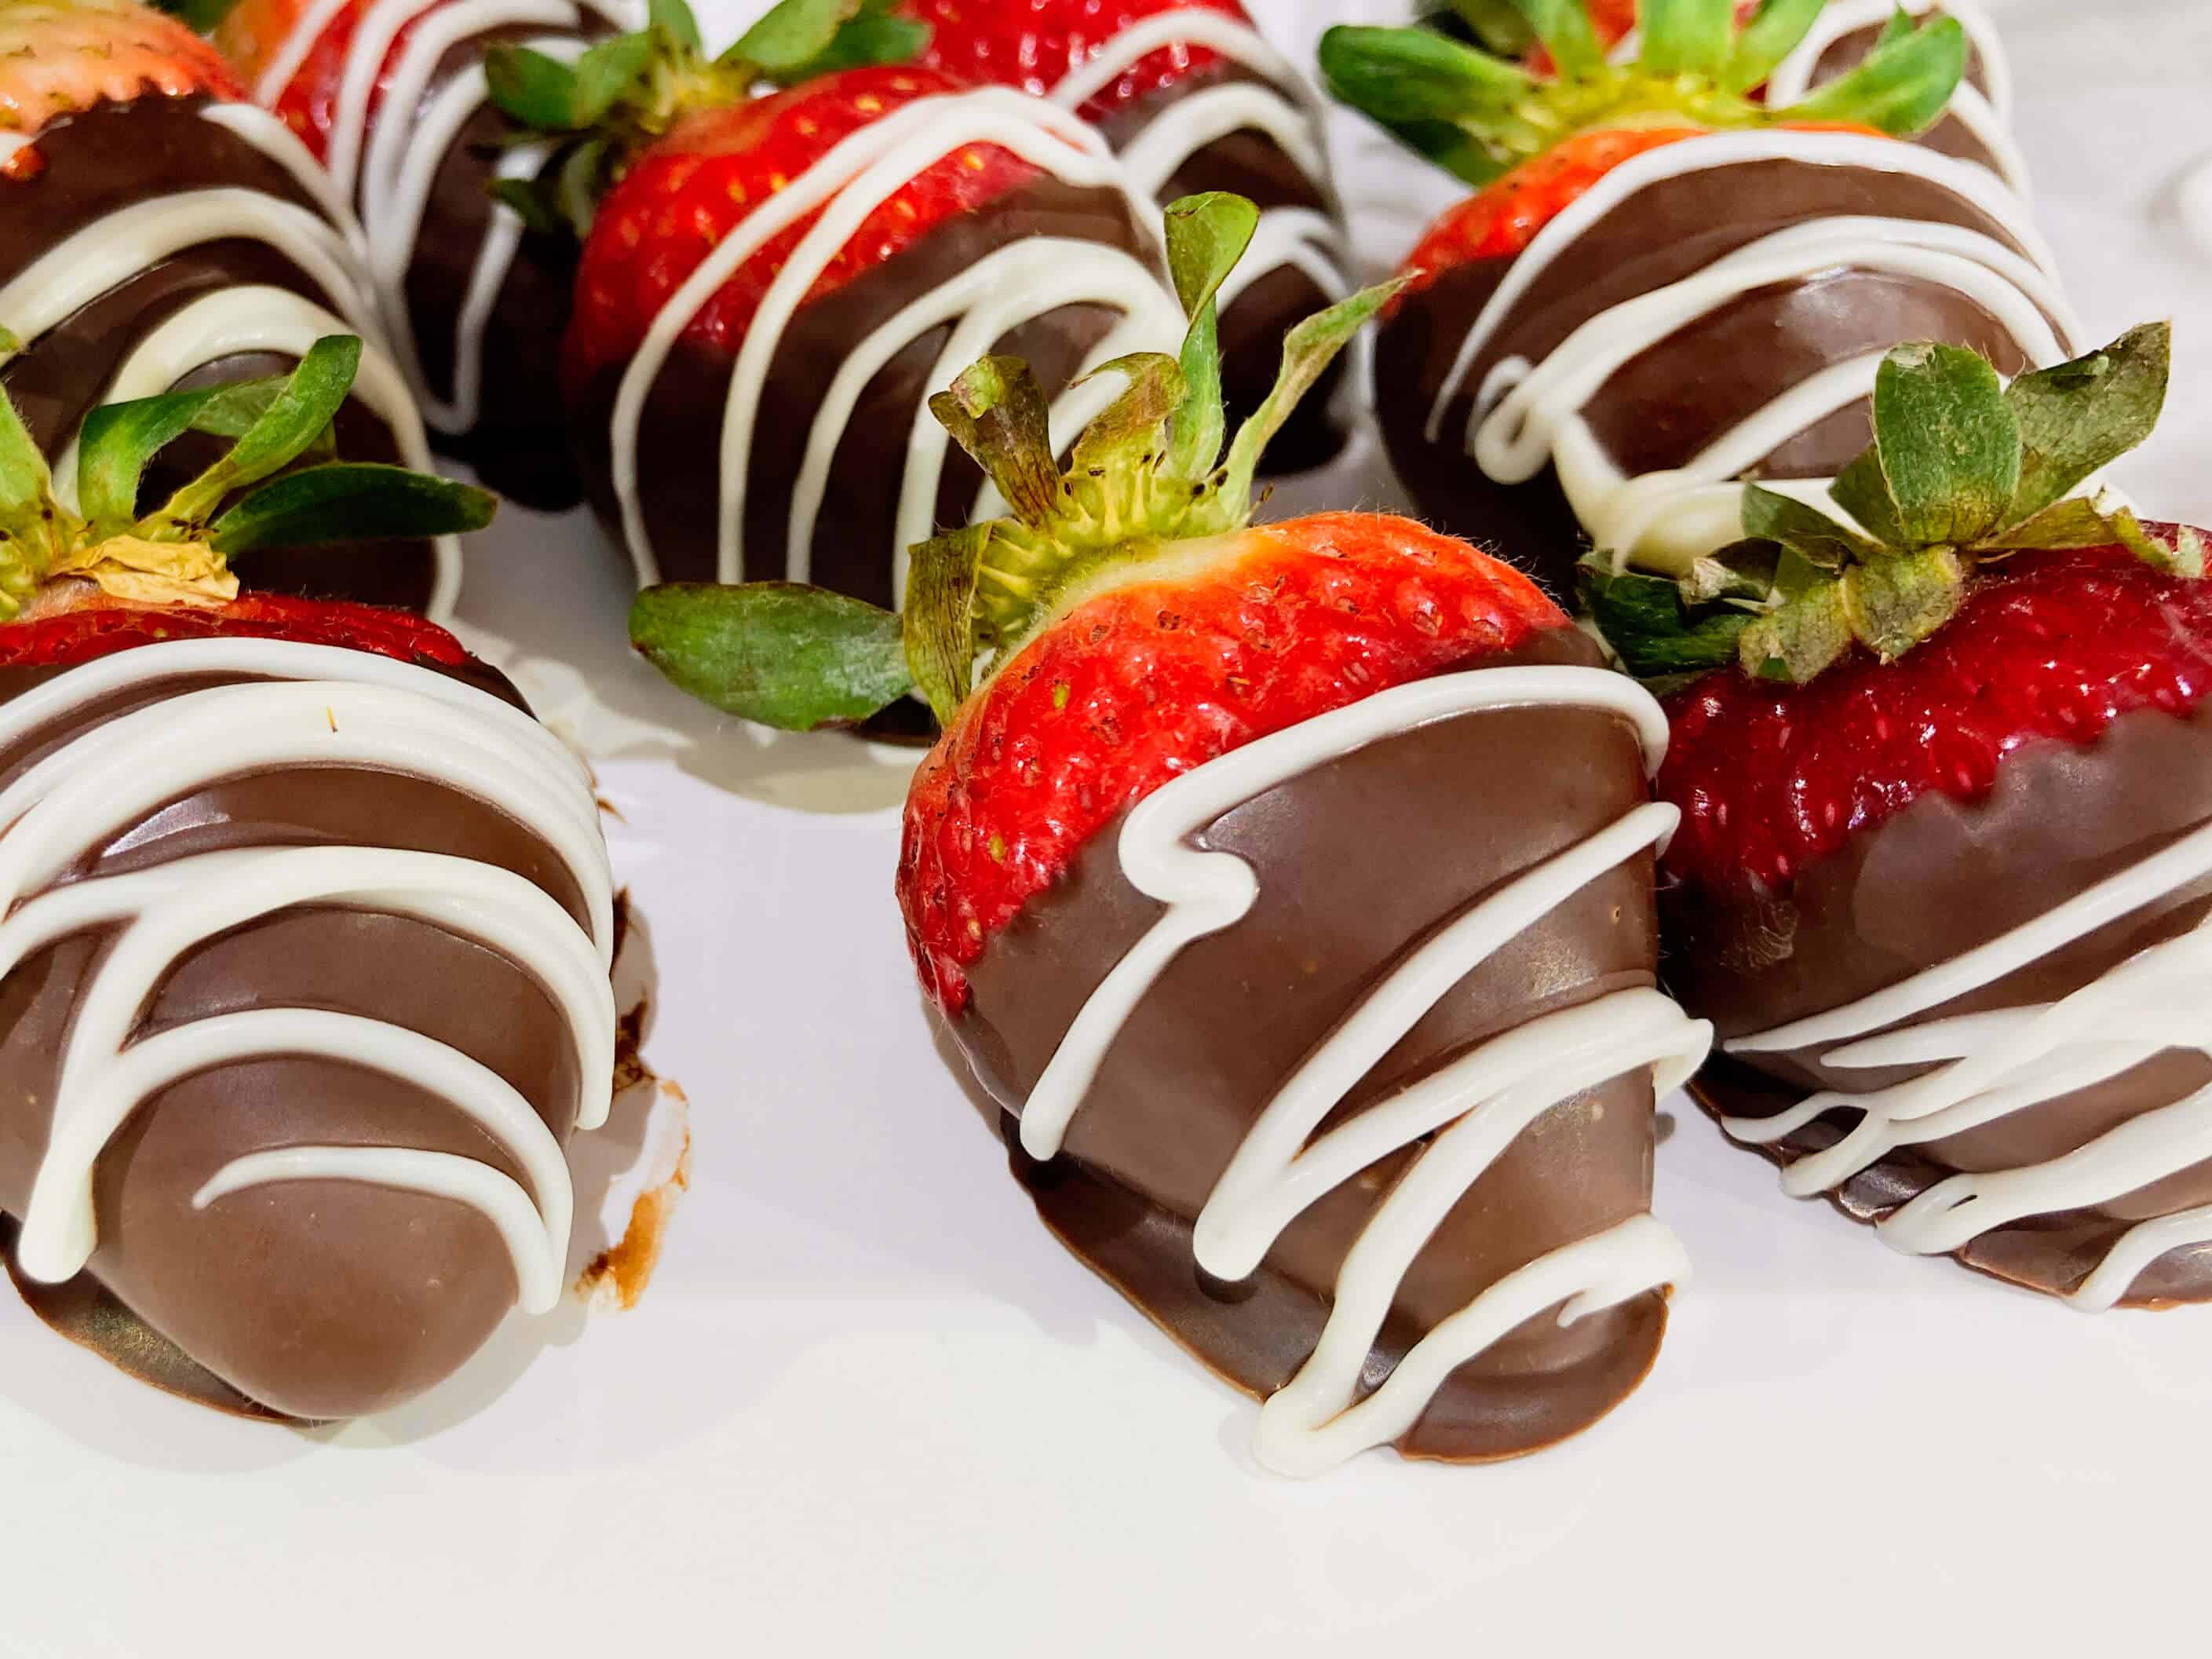 How to Make Chocolate Covered Strawberries in the Microwave